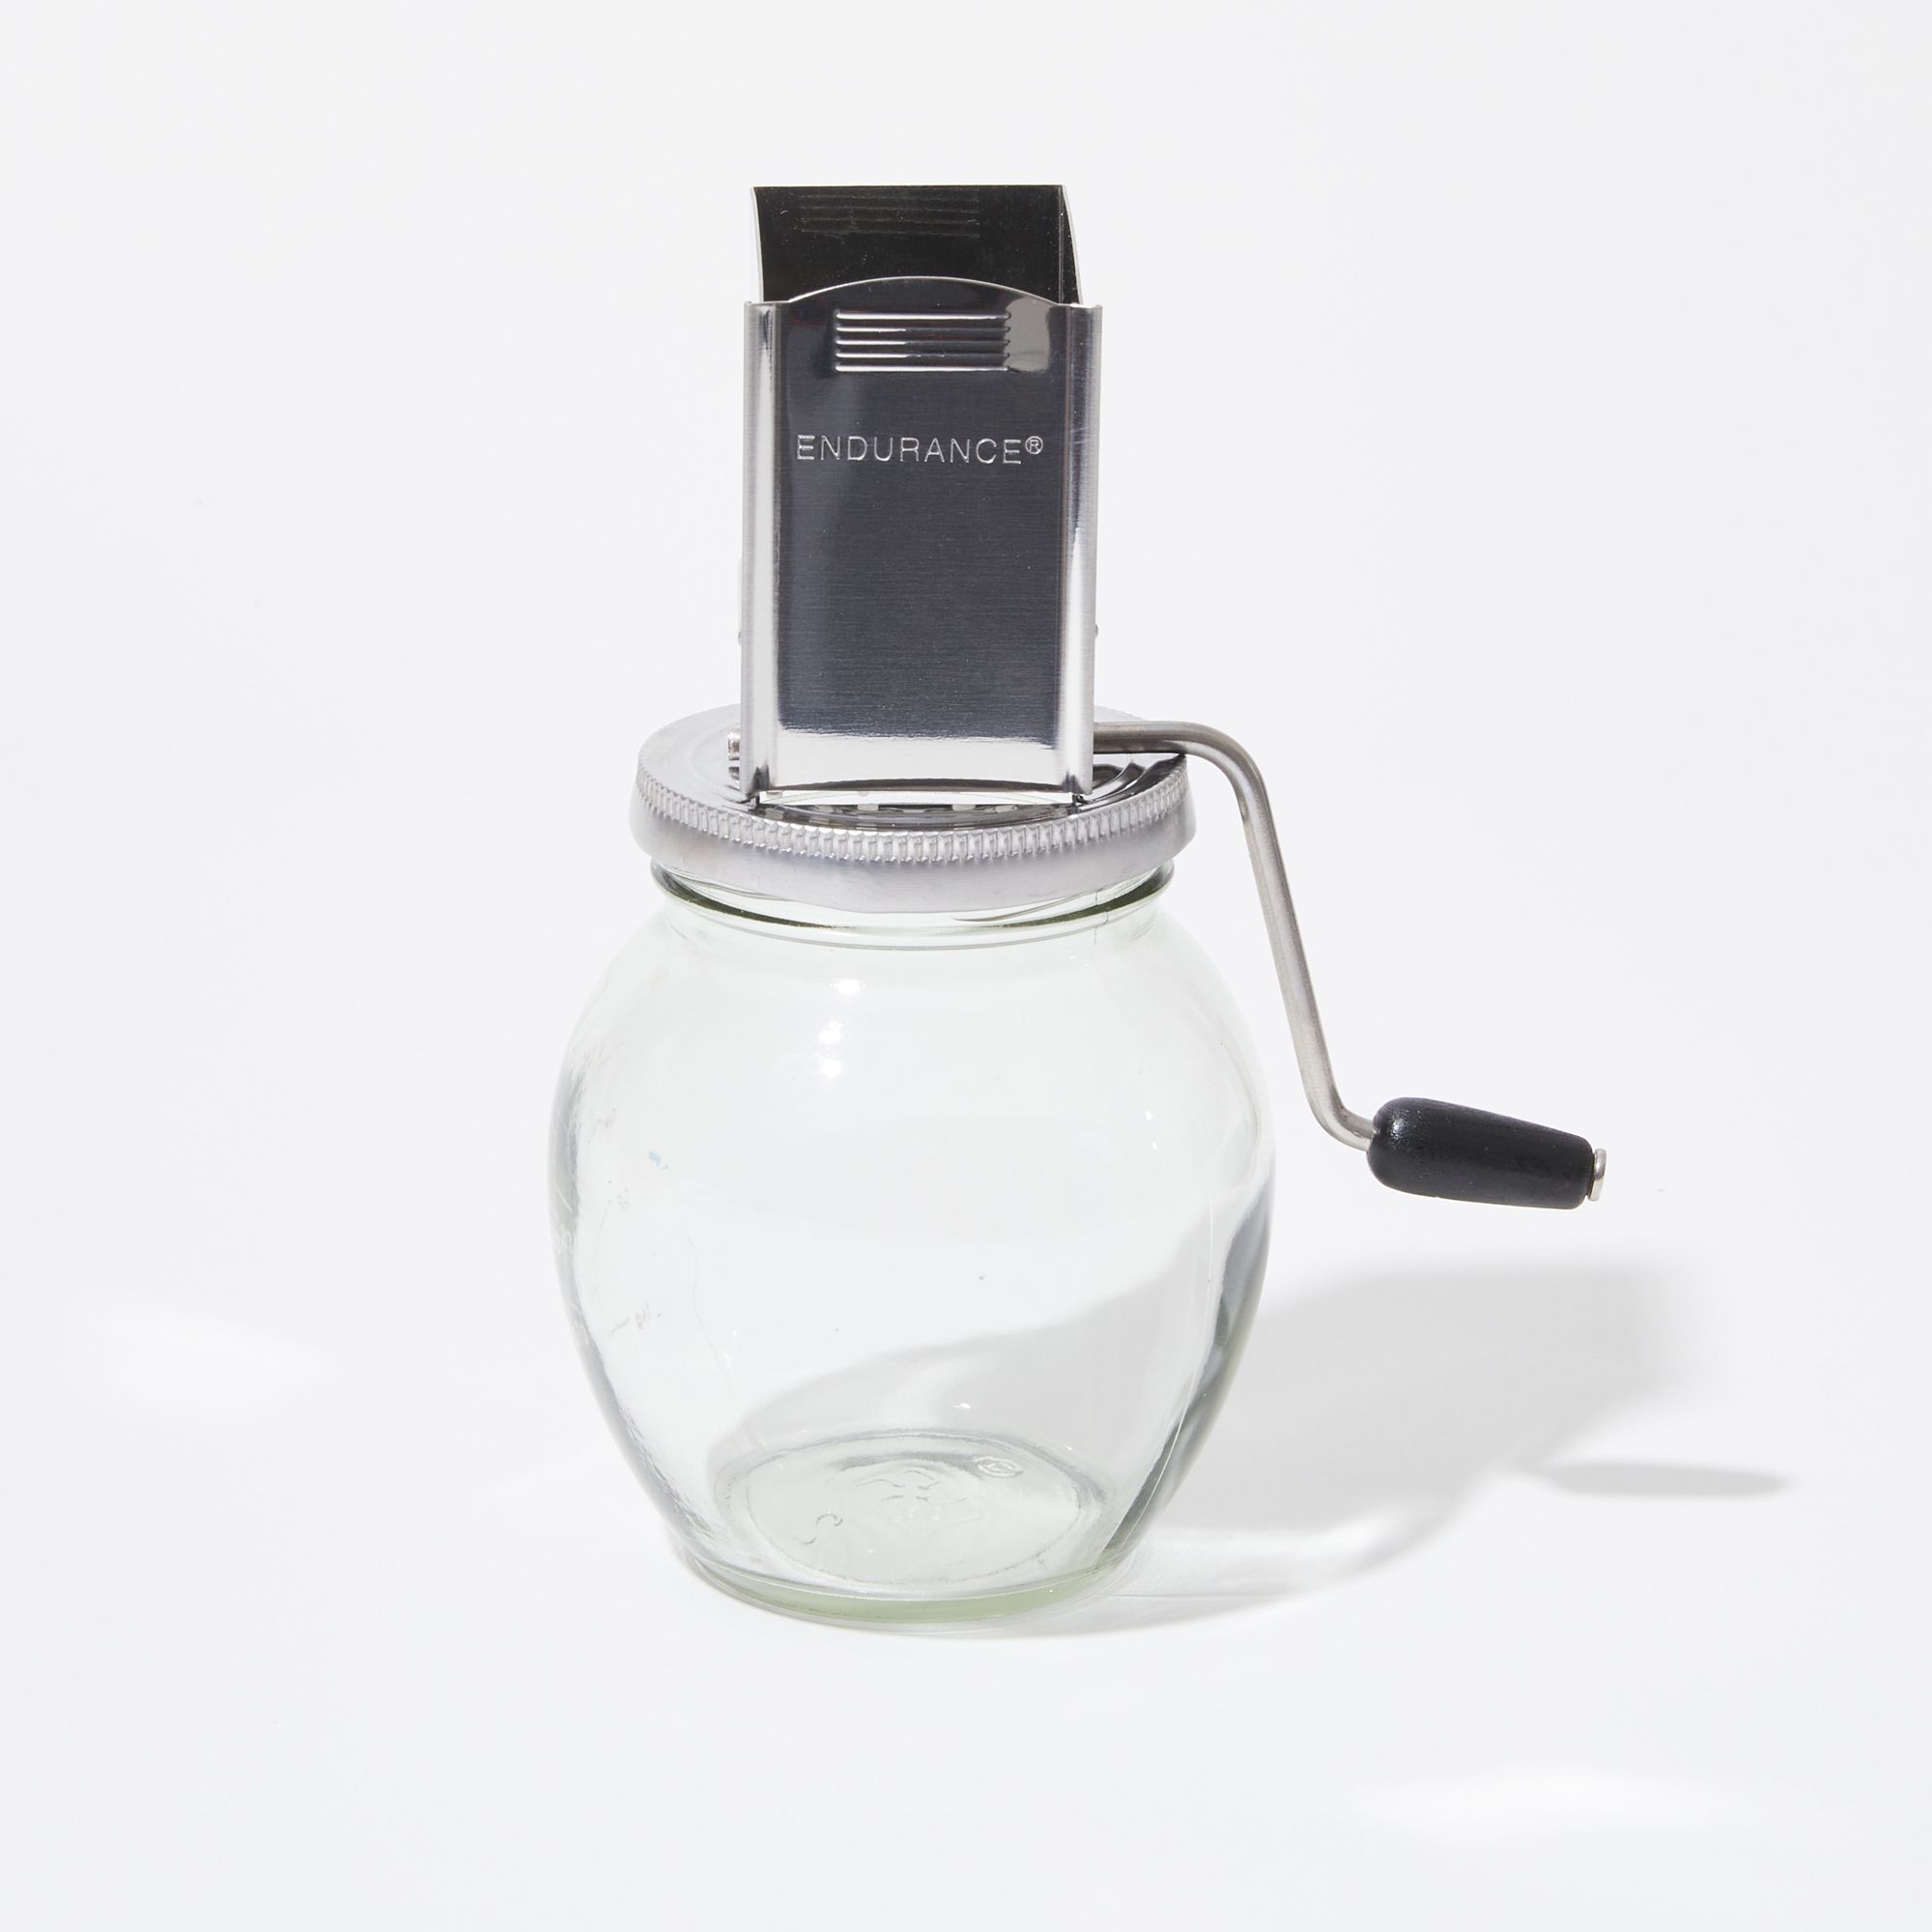 Square metal shute with a S-curved crank handle atop a clear round glass jar